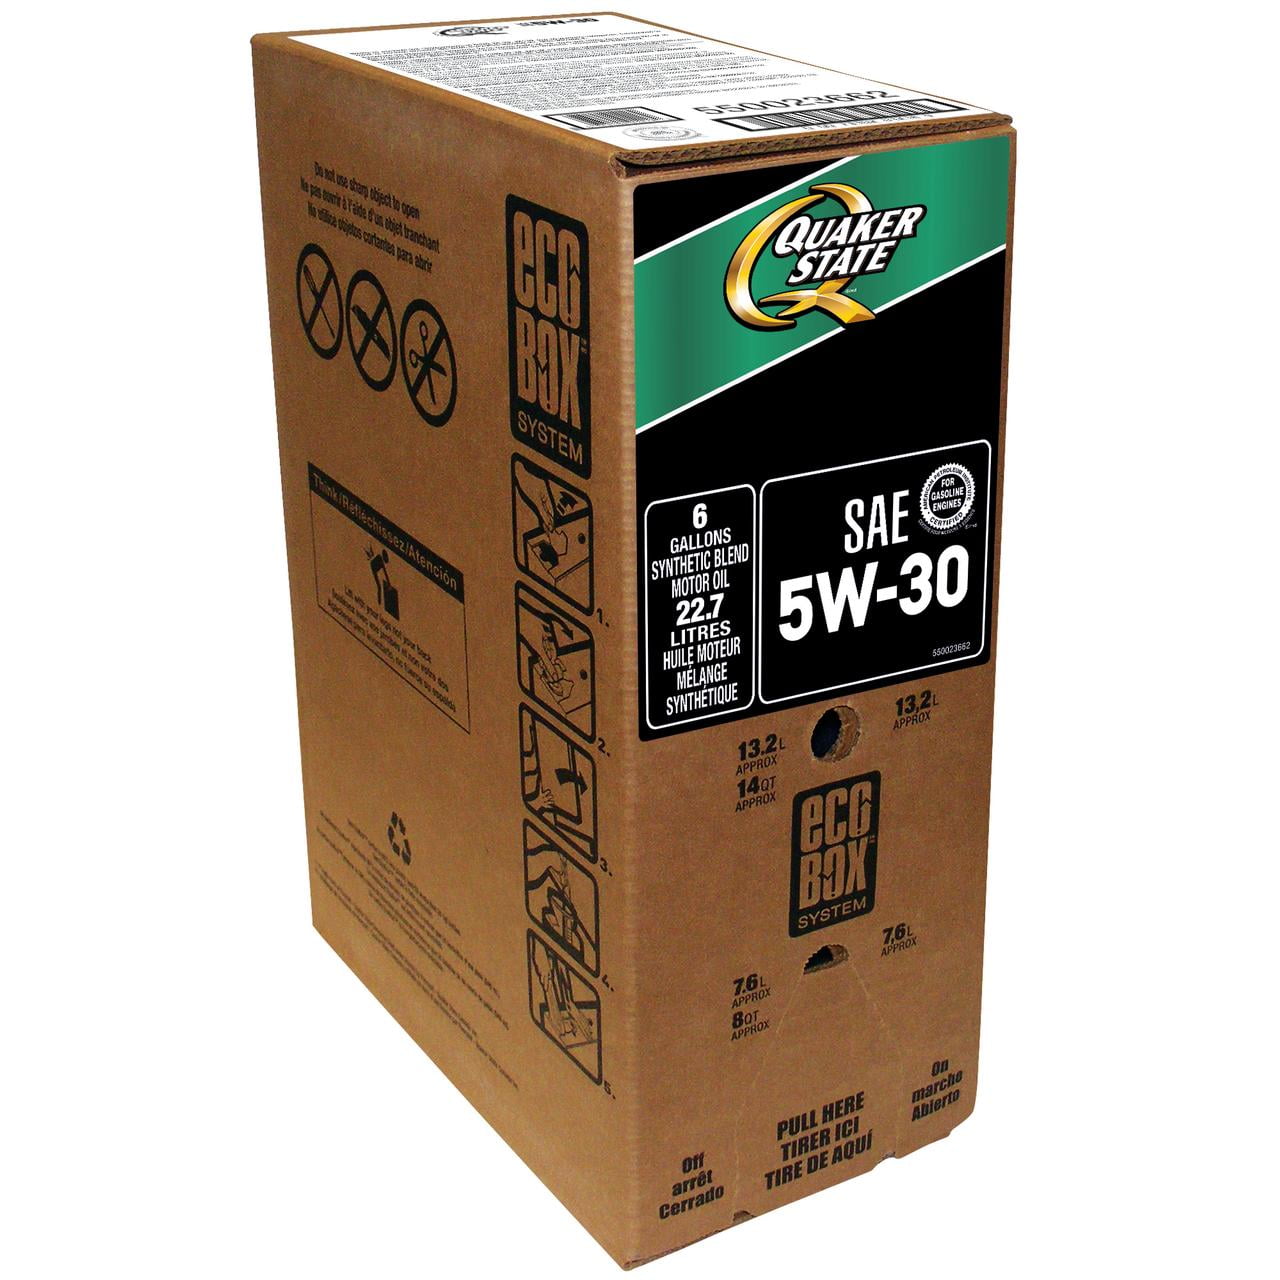 quaker-state-advanced-durability-5w-30-offer-valid-for-in-store-oil